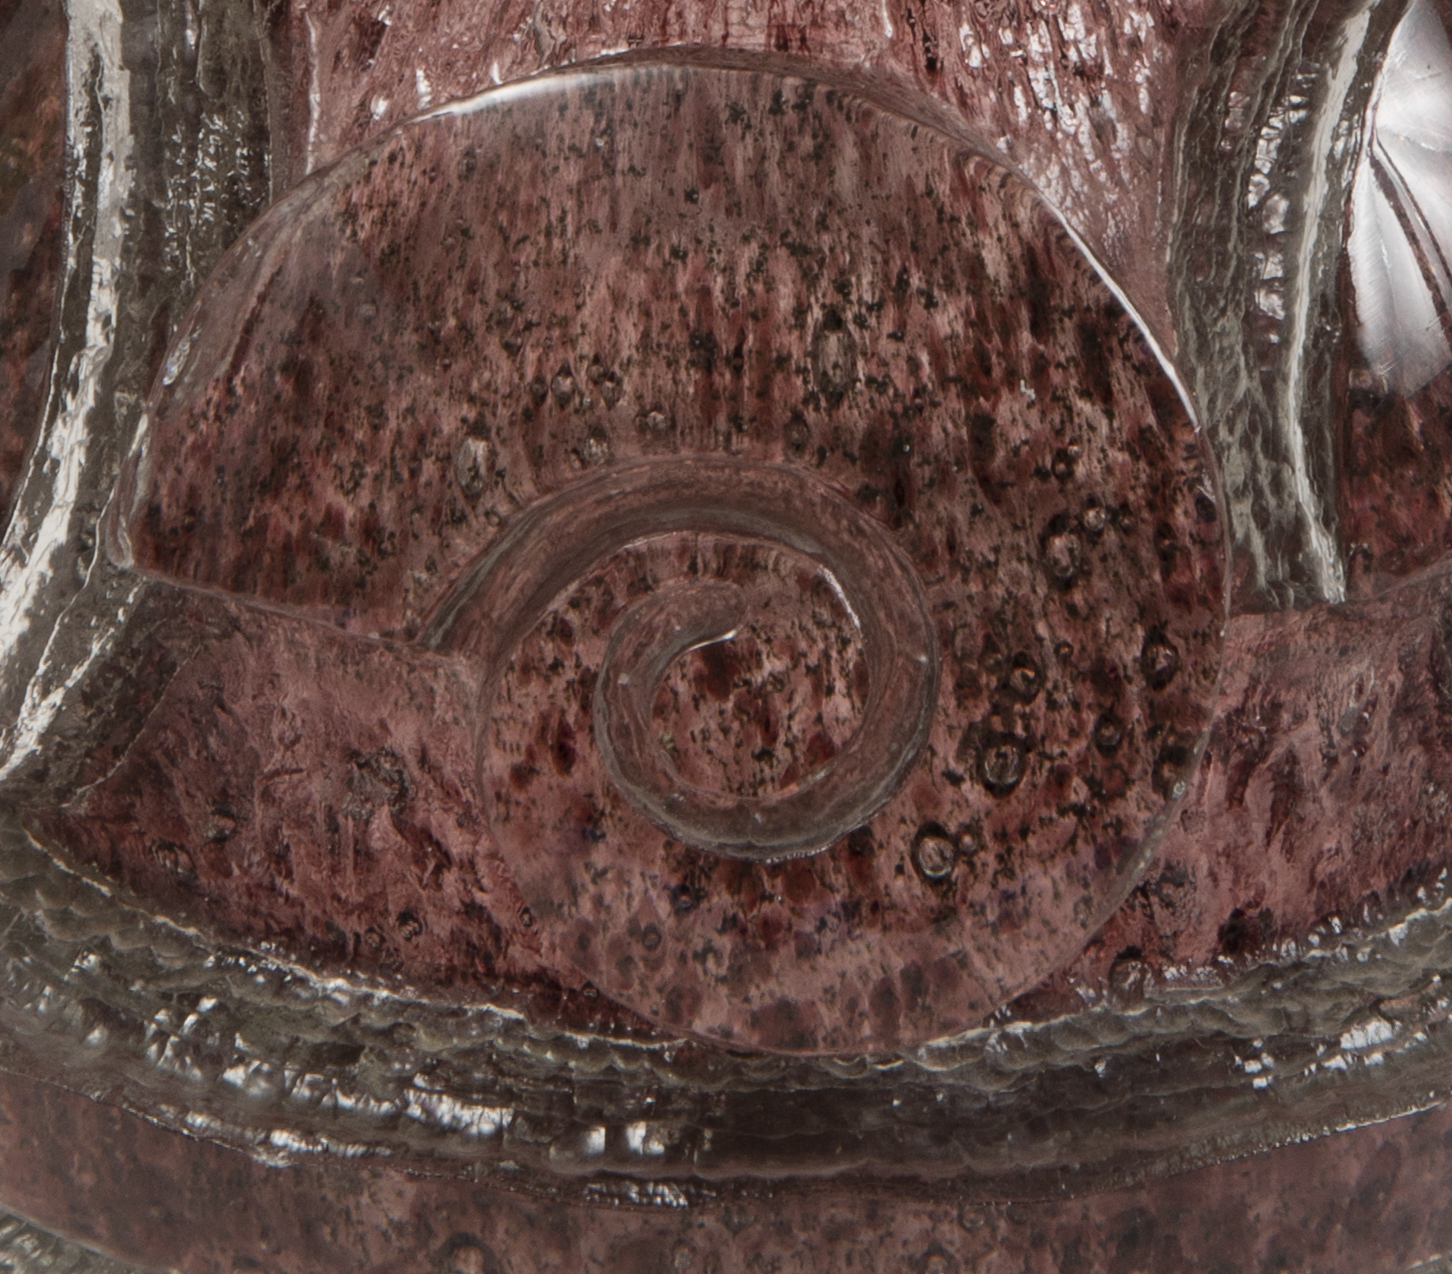 Detail of a purple glass object highlighting the raised, spiraled form of a snail shell with a bubbled texture in the material of the glass.